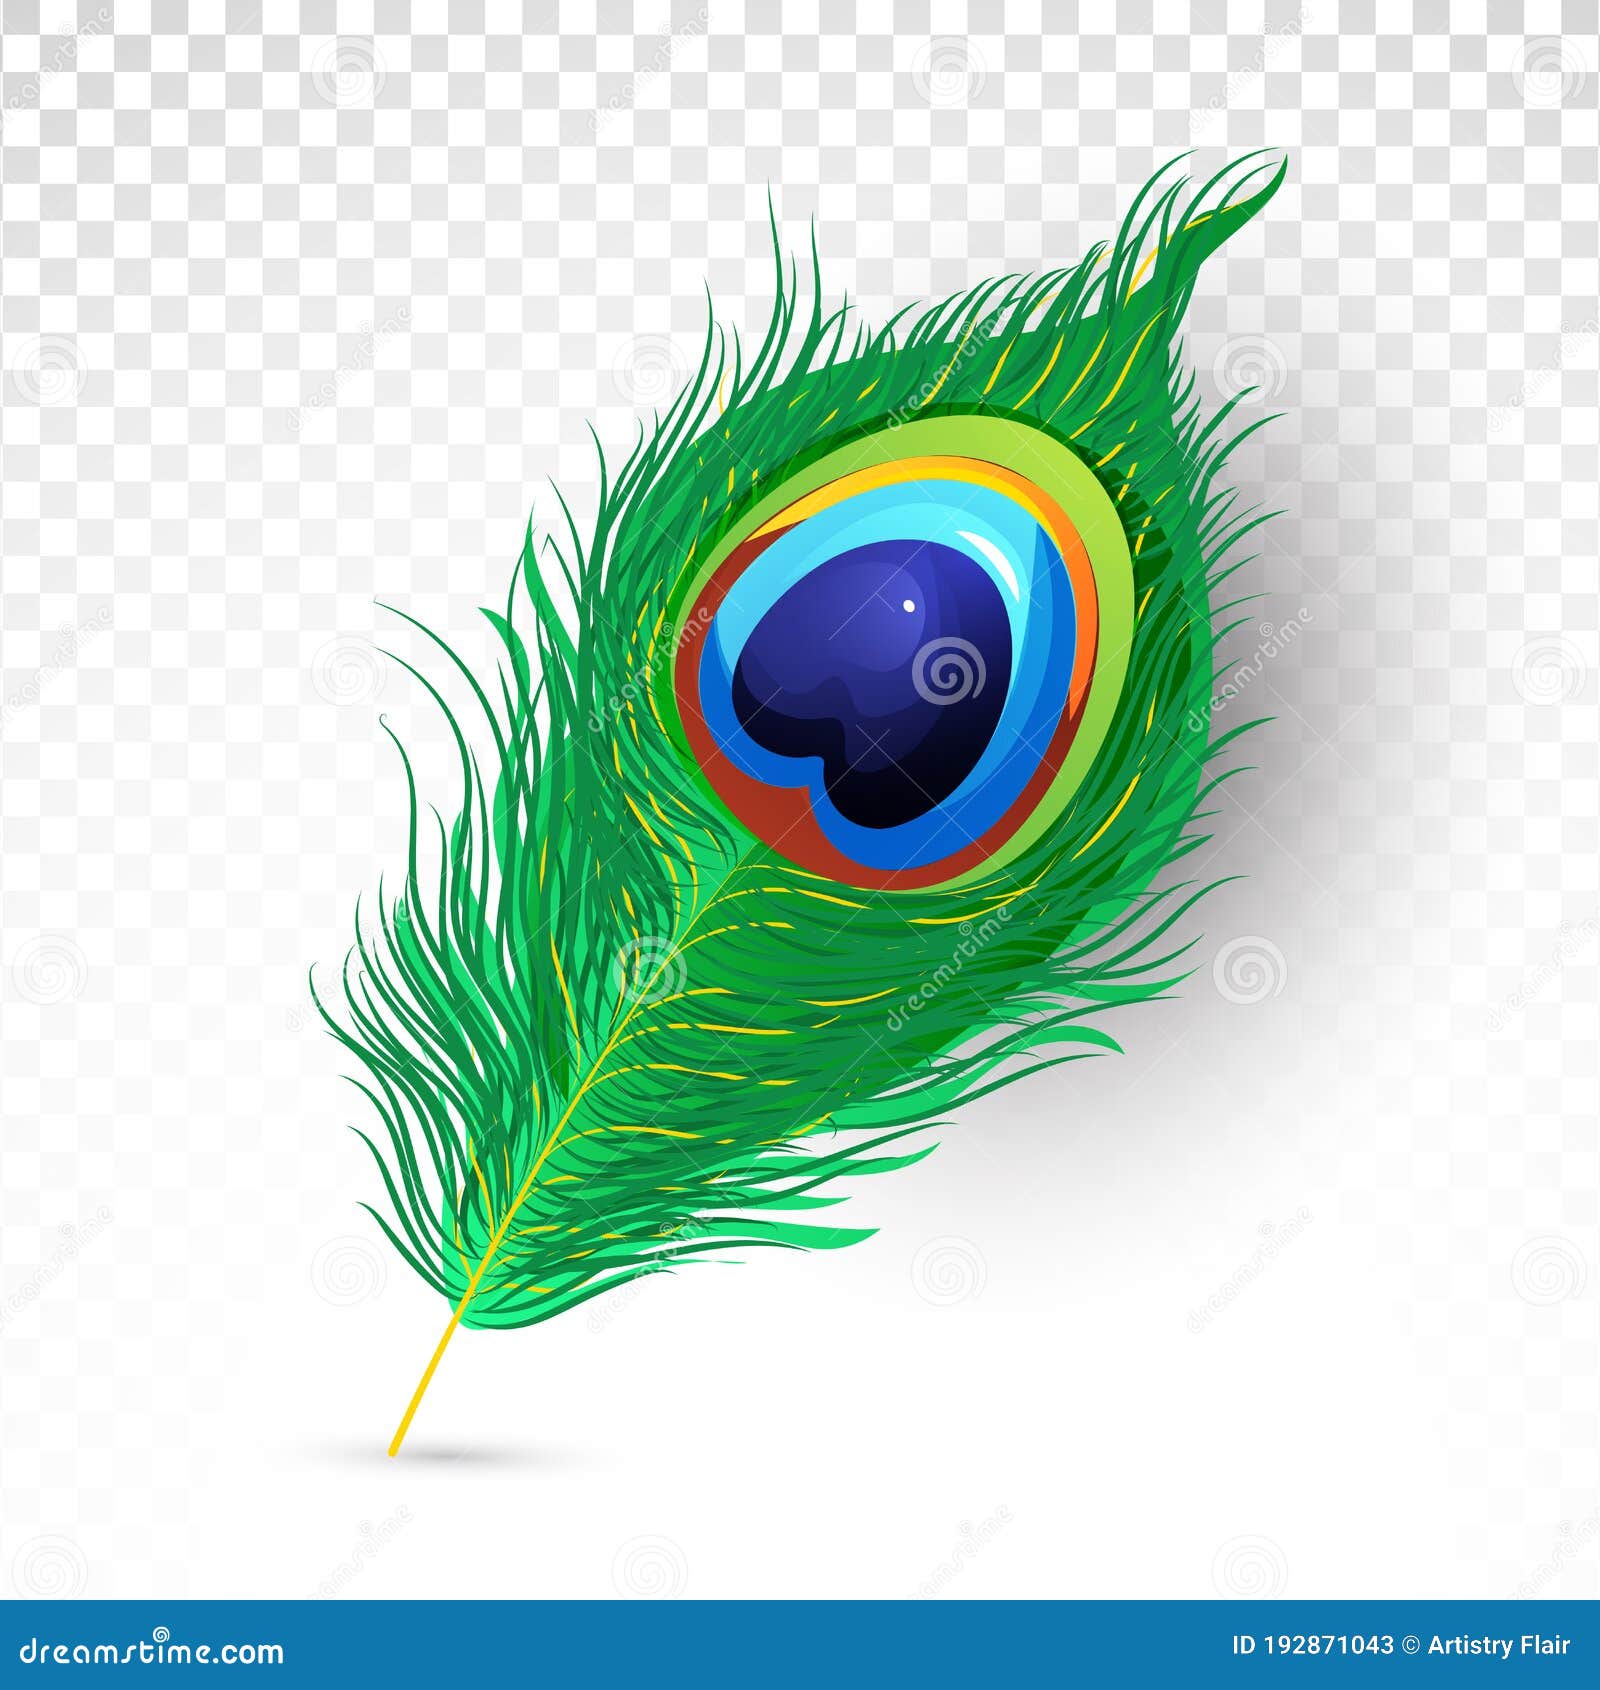 Realistic Beautiful Peacock Feather Illustration on Transparent Png  Background Stock Vector - Illustration of colorful, drawing: 192871043